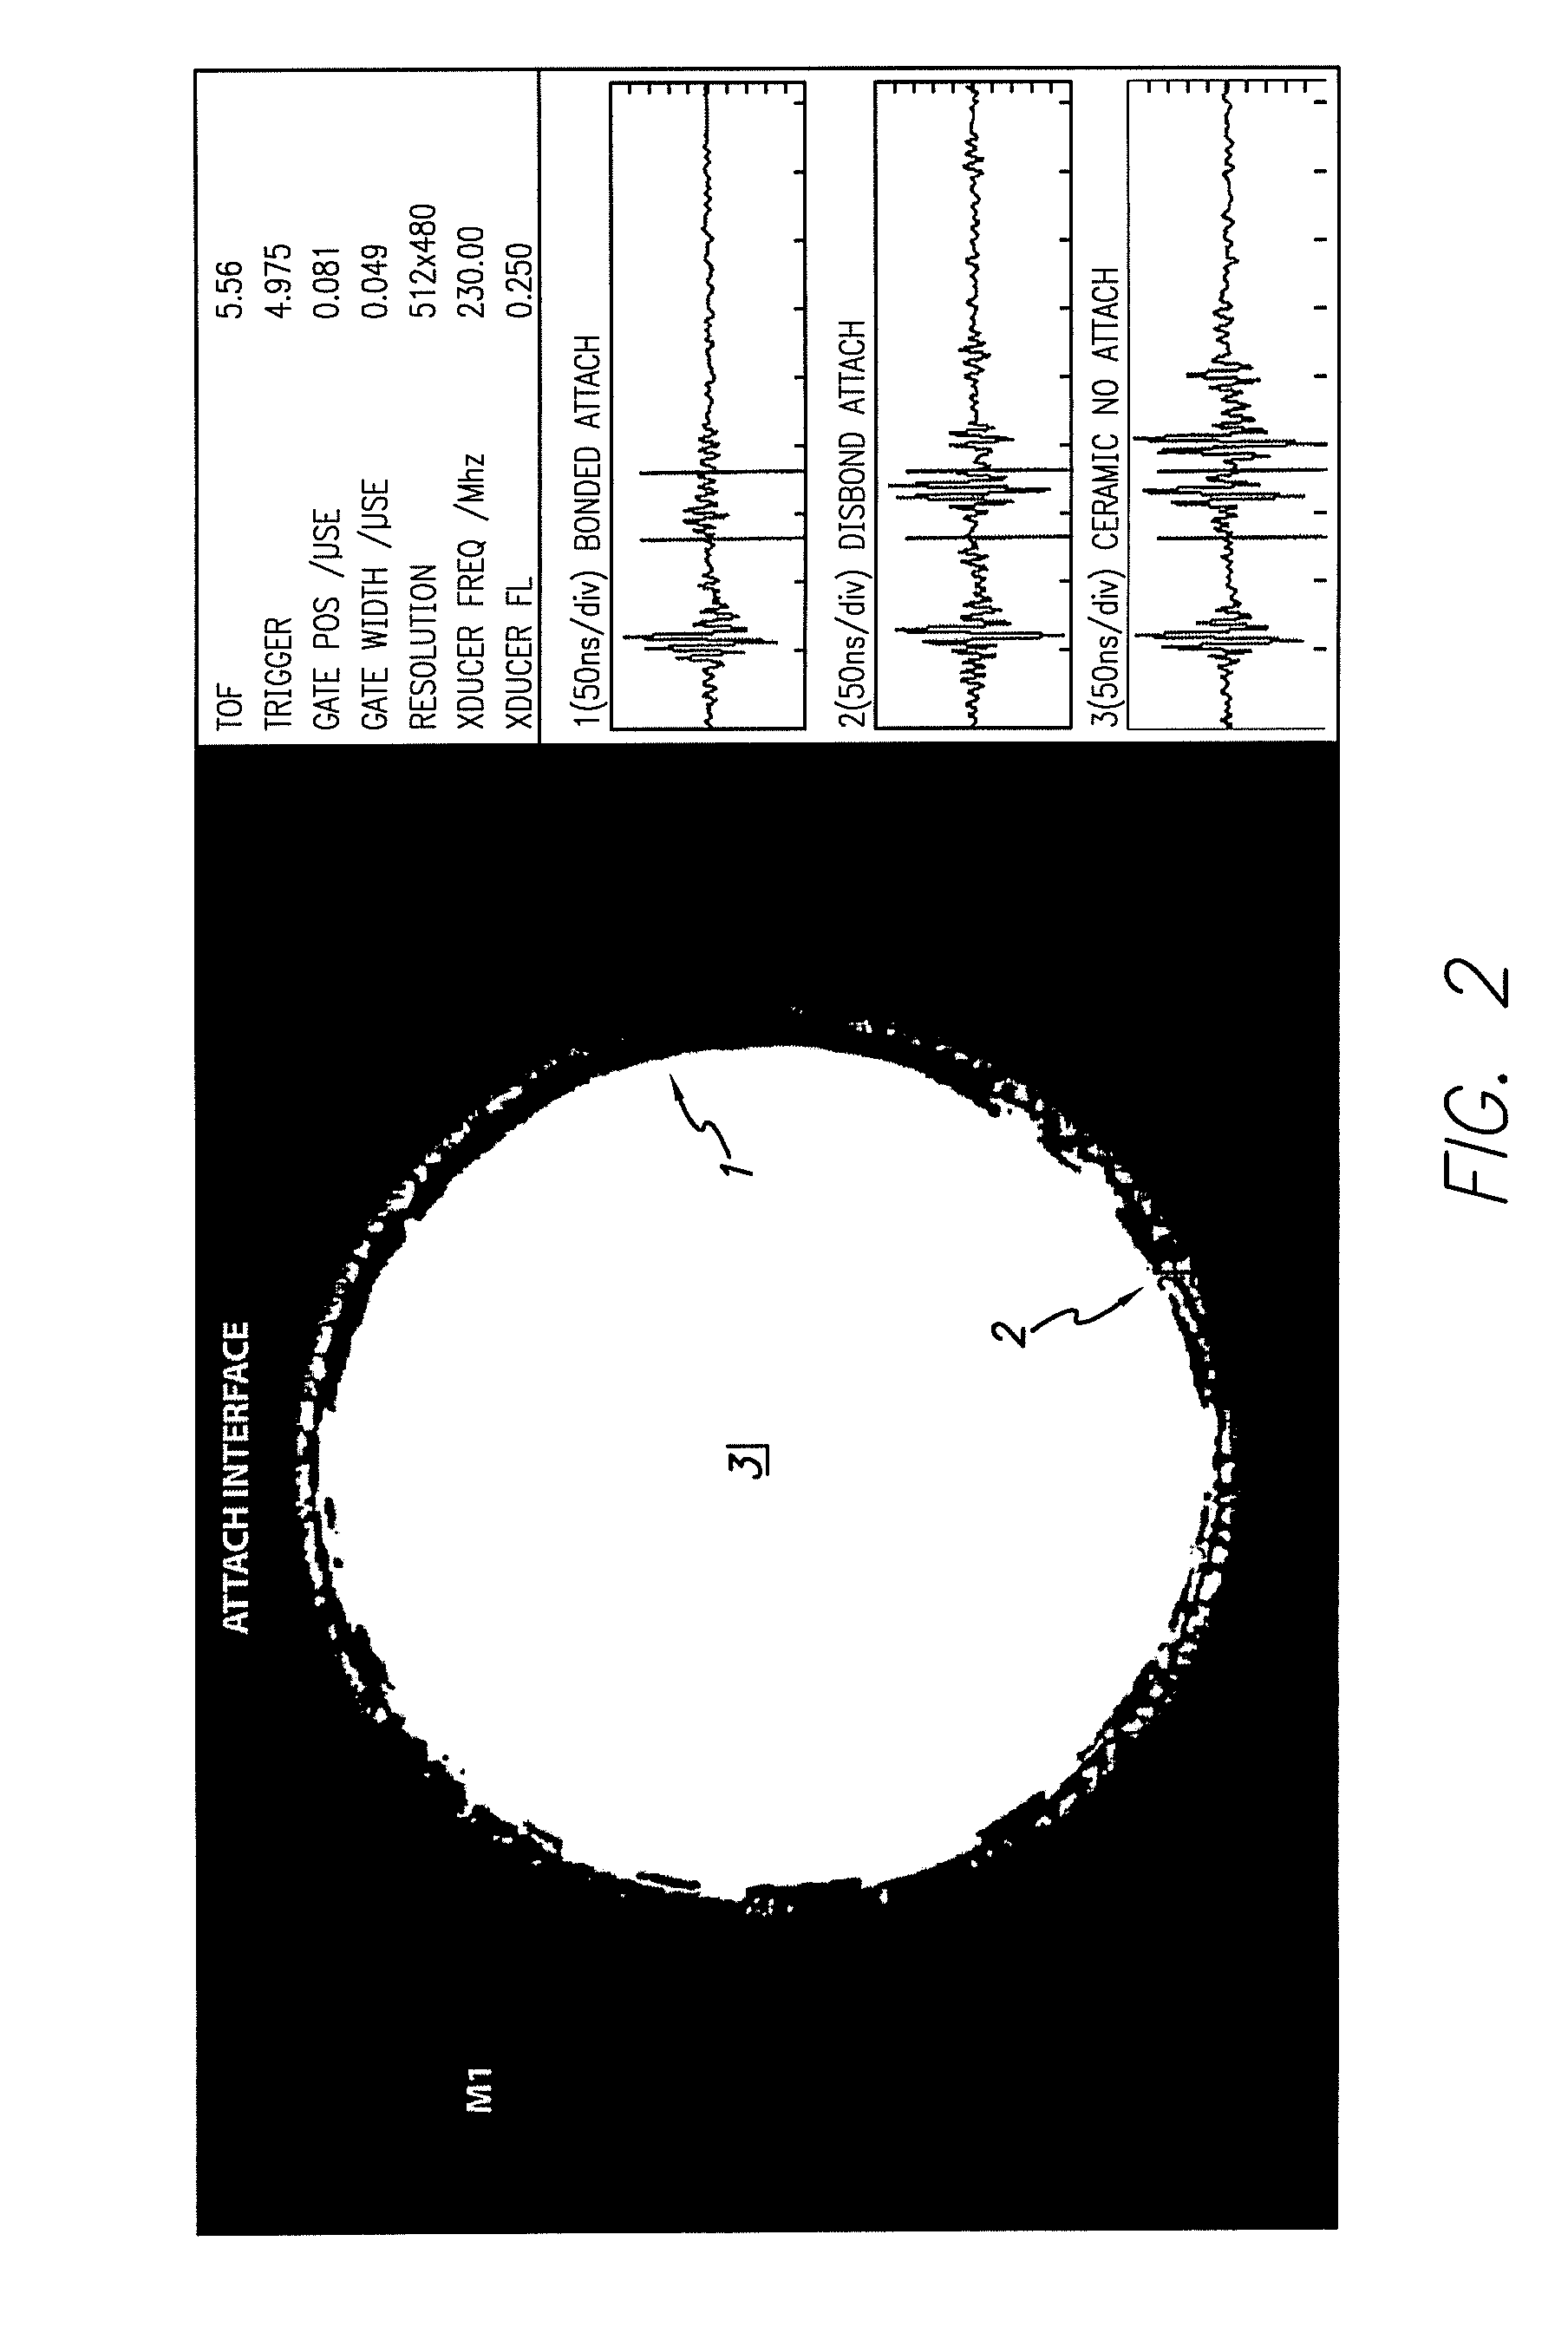 Method of inspection of materials for defects